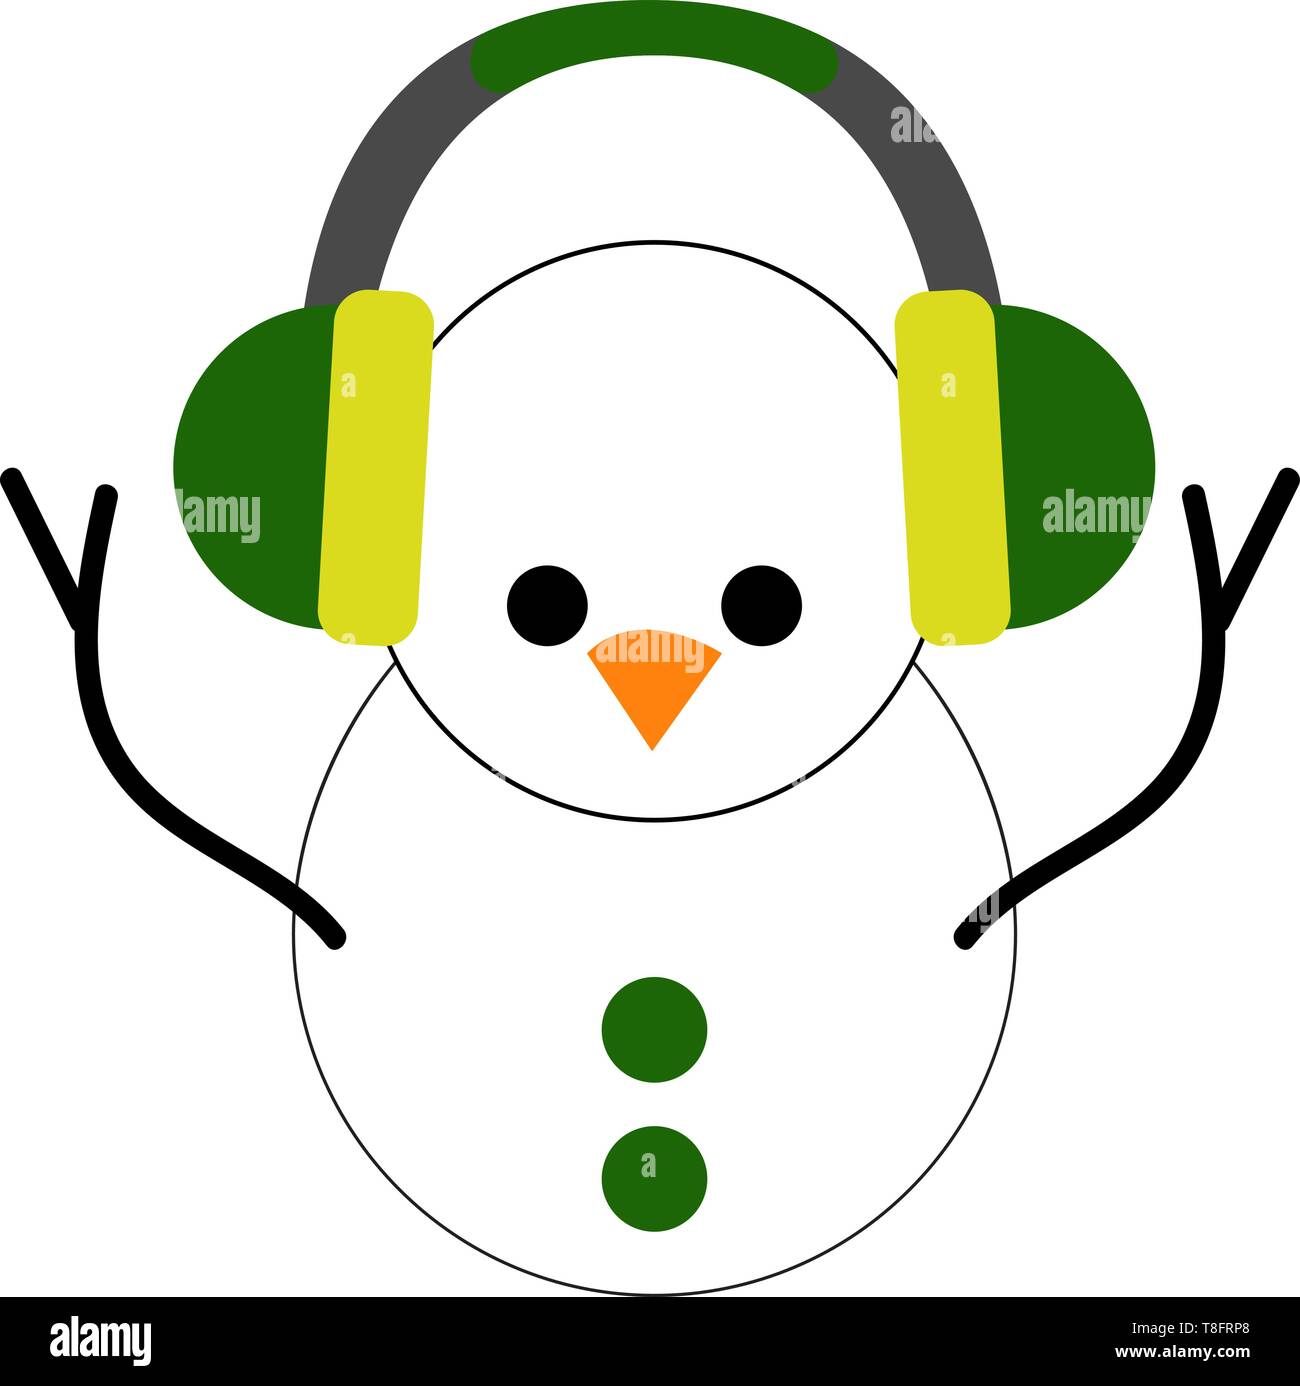 A cute snowman with two balls of different sizes, decorated with two circular green buttons, has two eyes and yellow beak, enjoys music from green hea Stock Vector